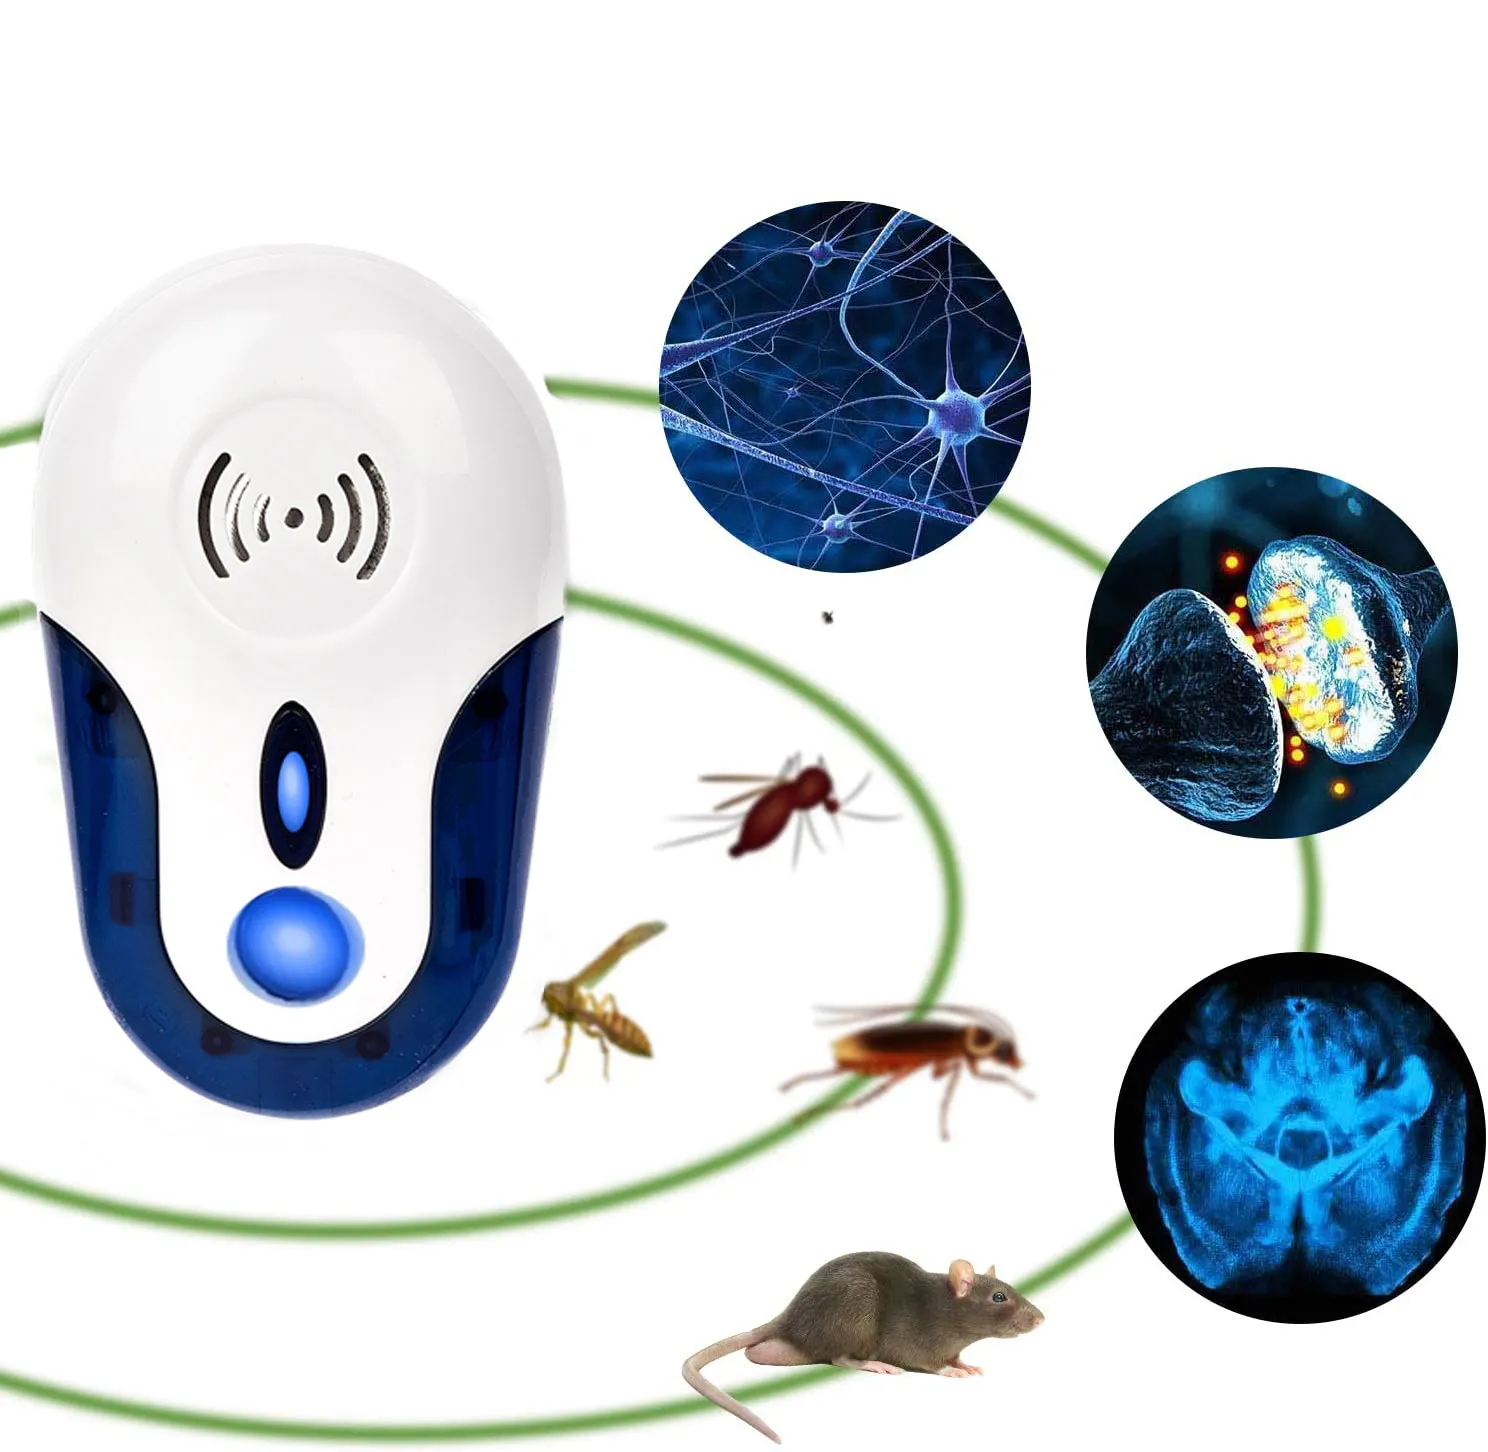 2022 Mosquito Cockrach Repeller Electronic Anti Rodent Bug Rats Ultrasonic Pest Repeller ultrasonic mosquito repellents